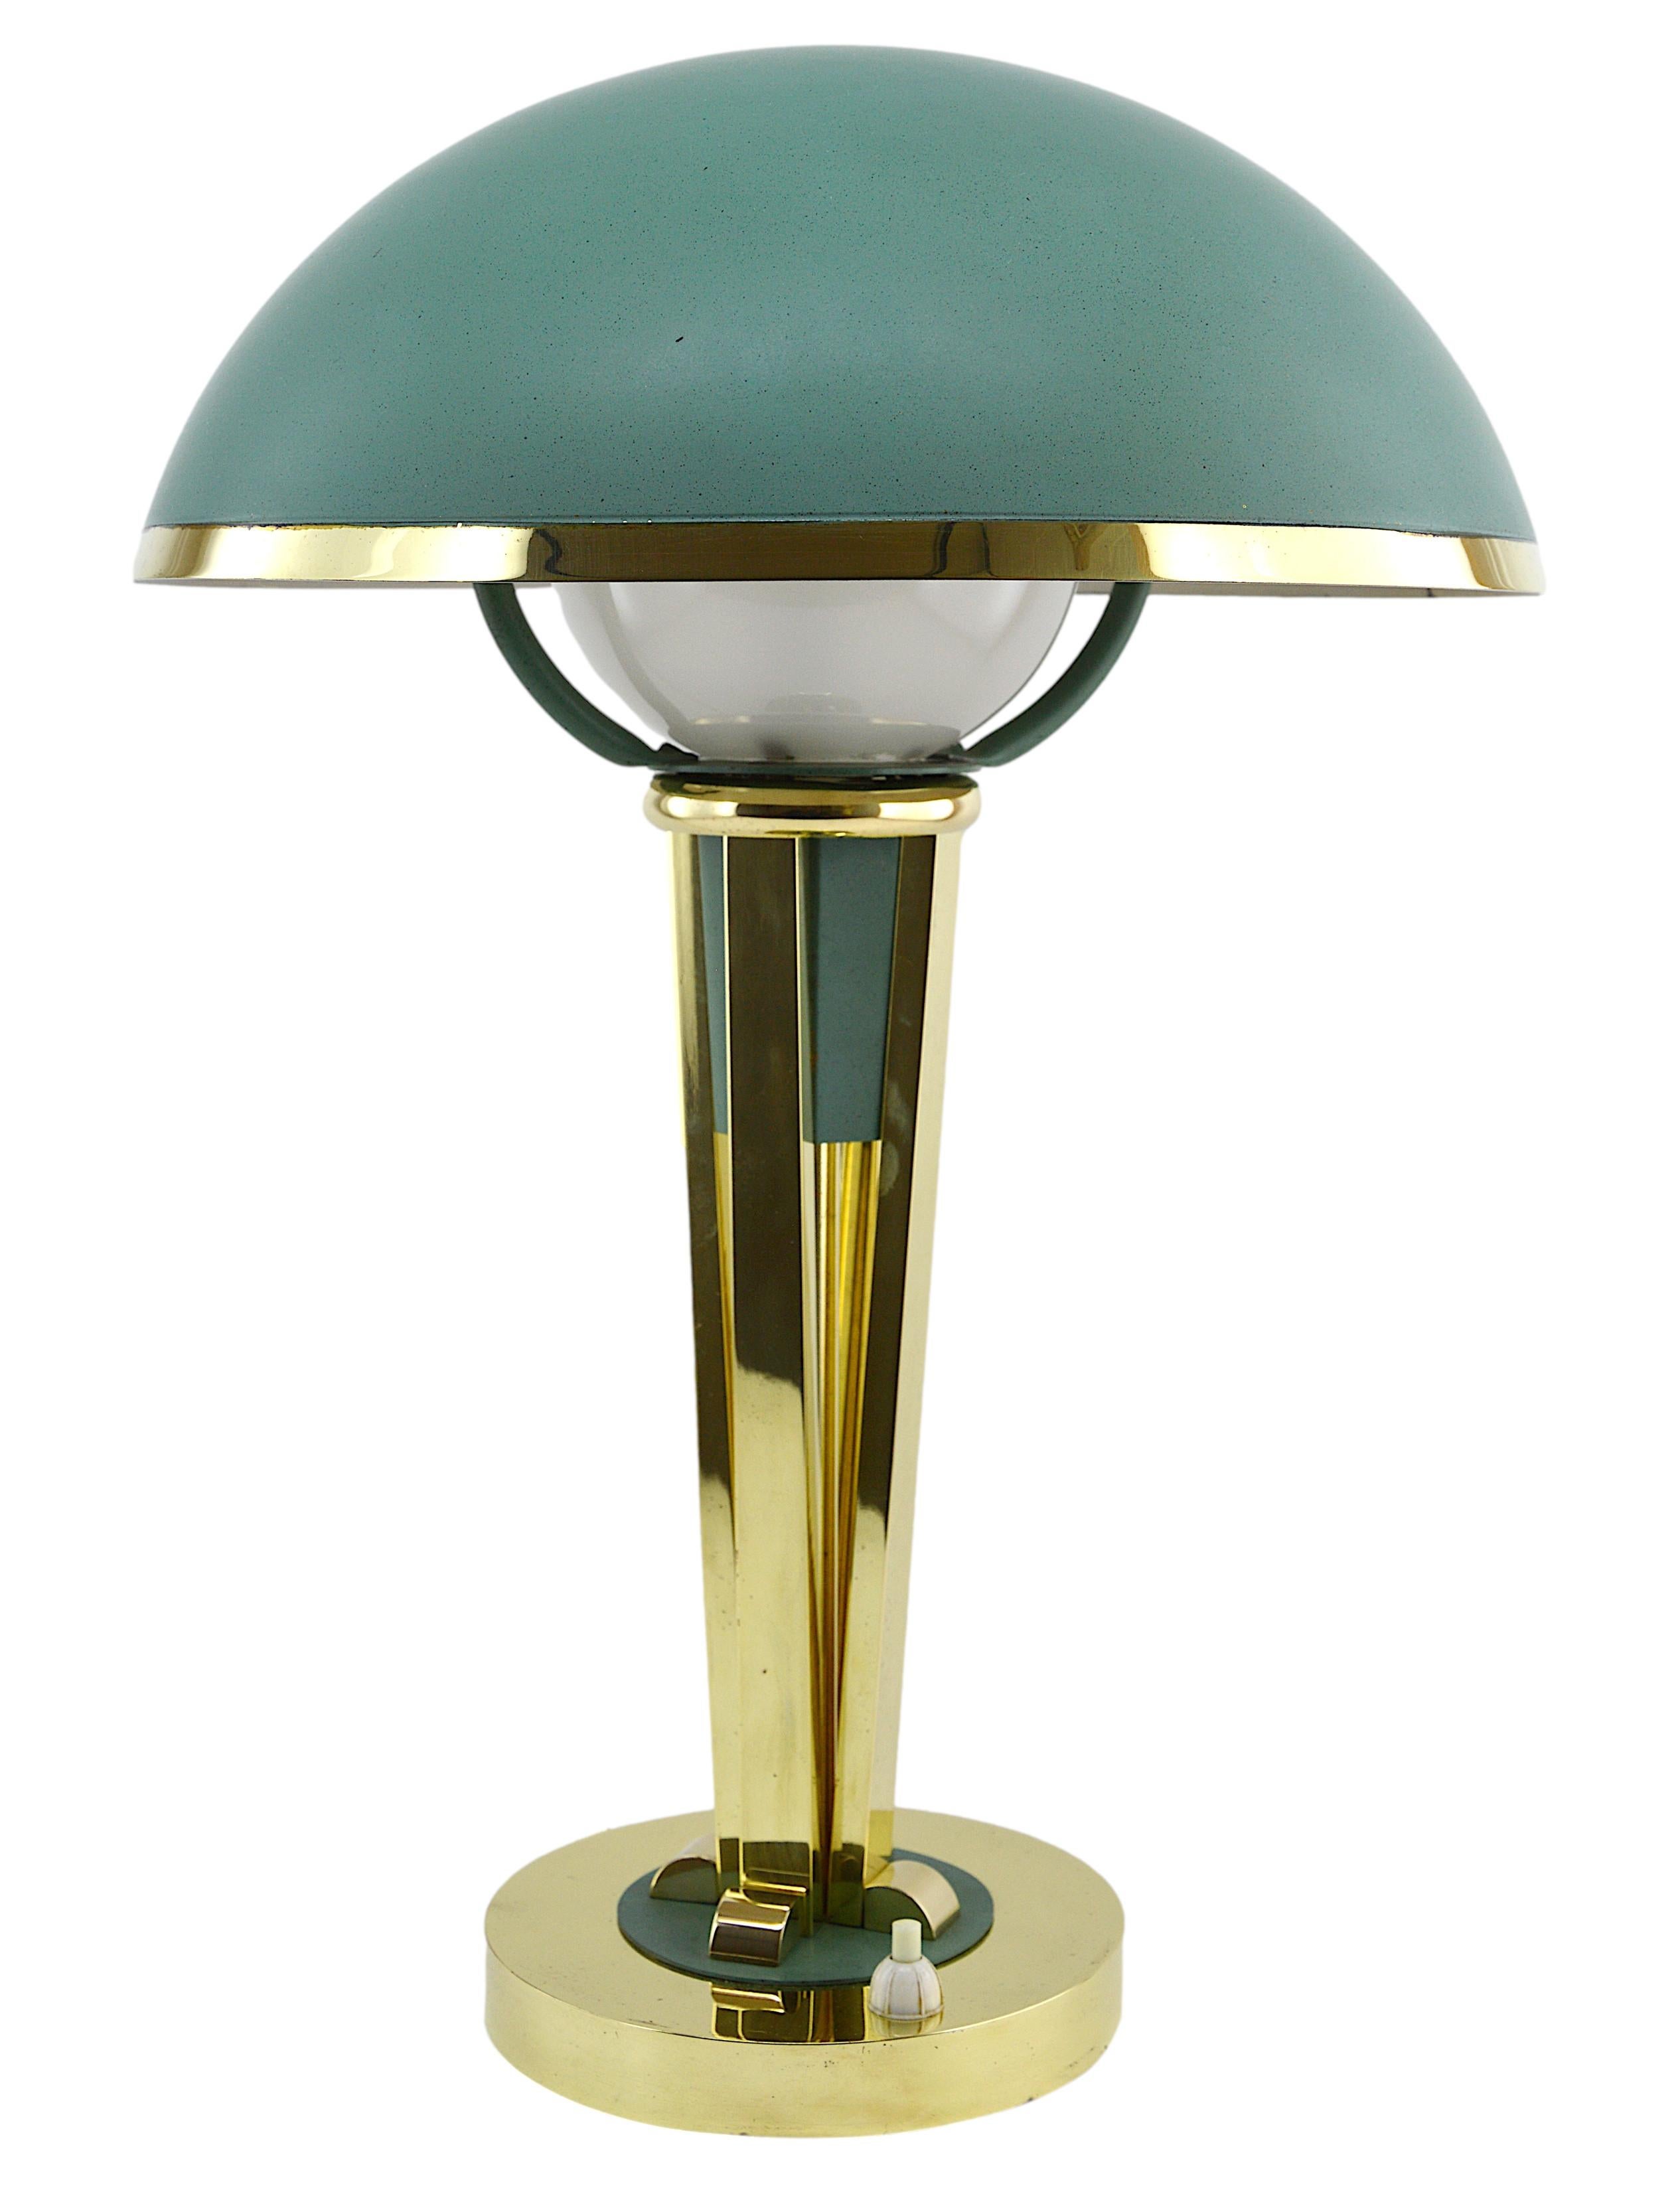 French Art Deco swiveling table or desk lamp, France, circa 1940. Brass and glass. Swiveling hemispherical brass shade painted granite like green. The paint is original. Round gilded brass base - The center in brass painted in the same way as the